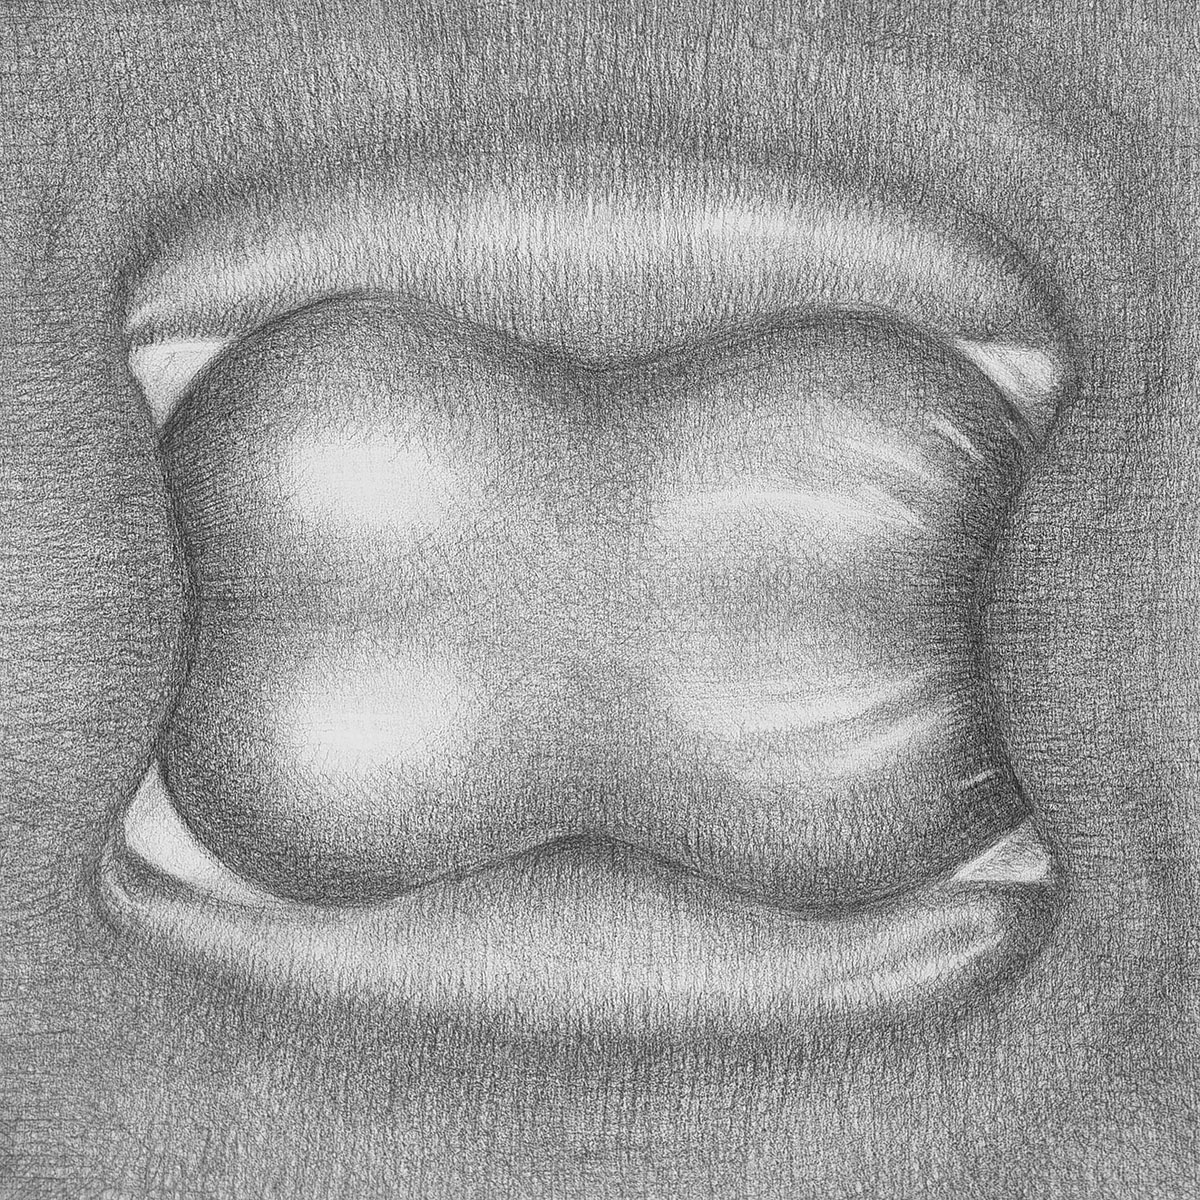 UNTITLED (BODYSCAPE 03), 202440 x 40 cmPencil on paper; museum glass